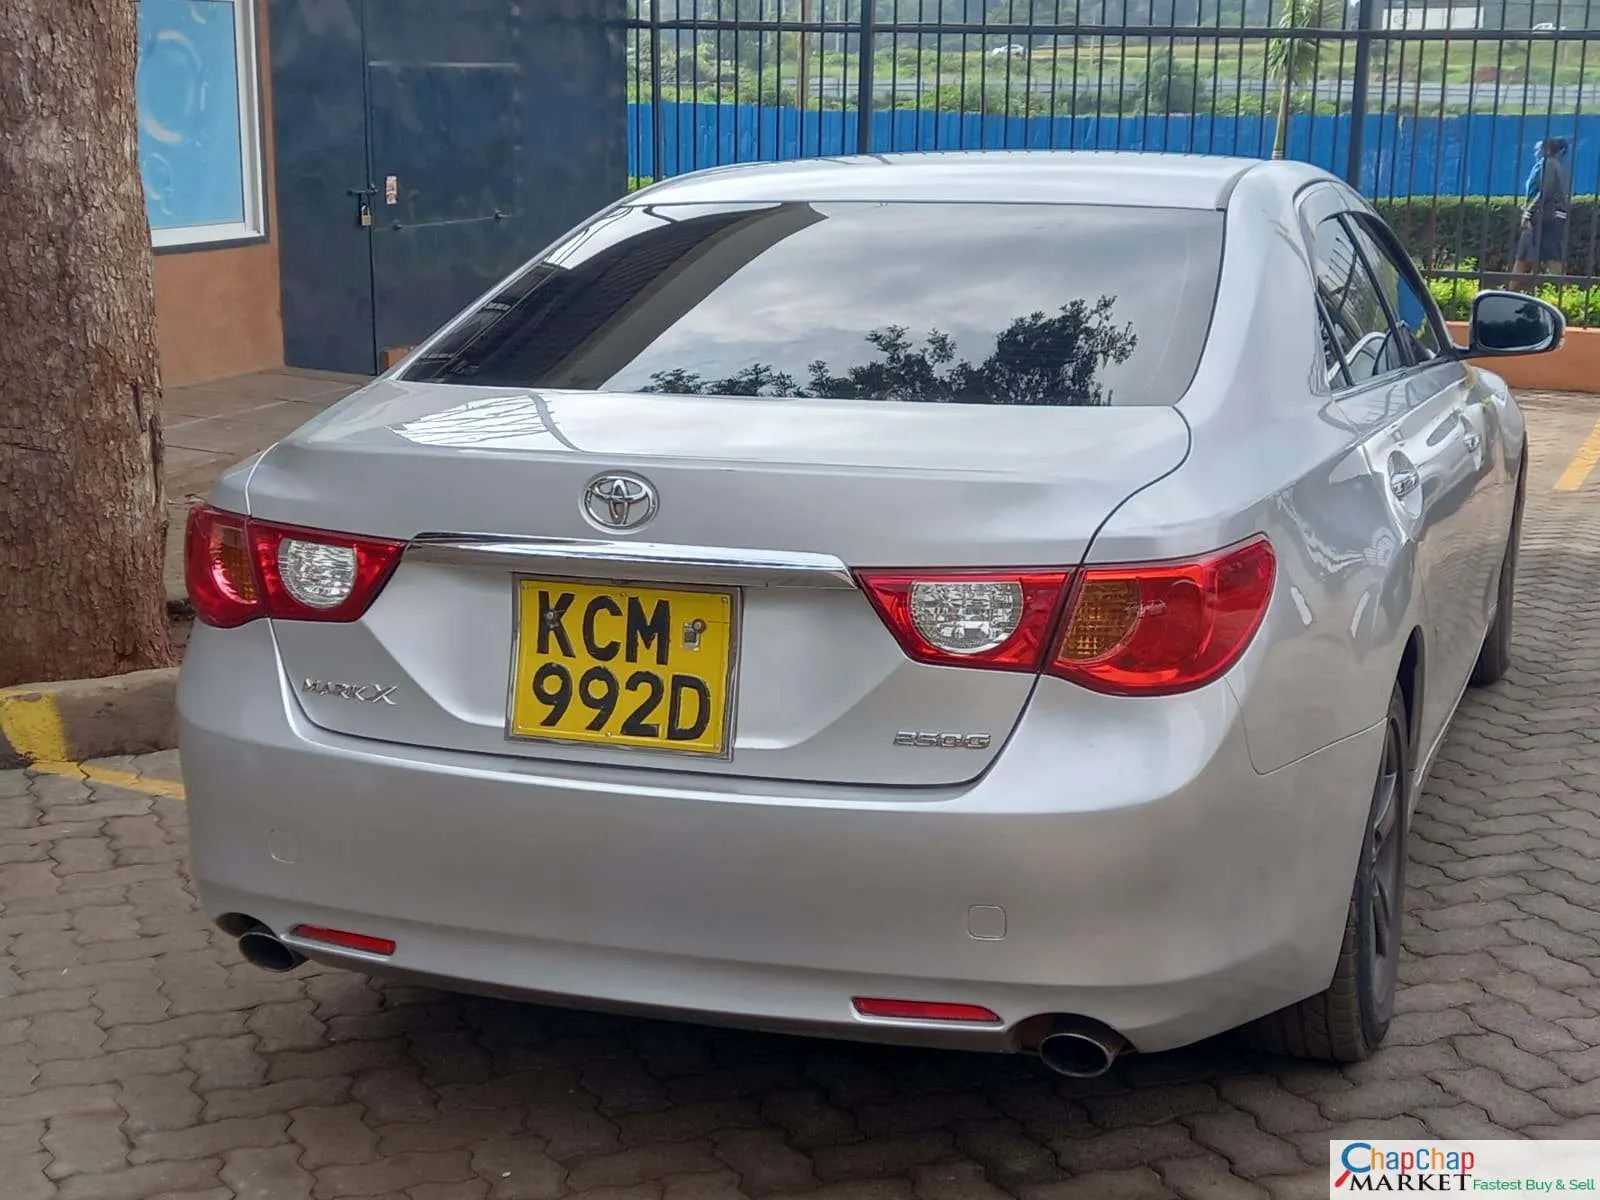 Cars Cars For Sale-Toyota Mark X Kenya You Pay 30% Deposit mark x for sale in kenya hire purchase installments Trade in OK Wow 8